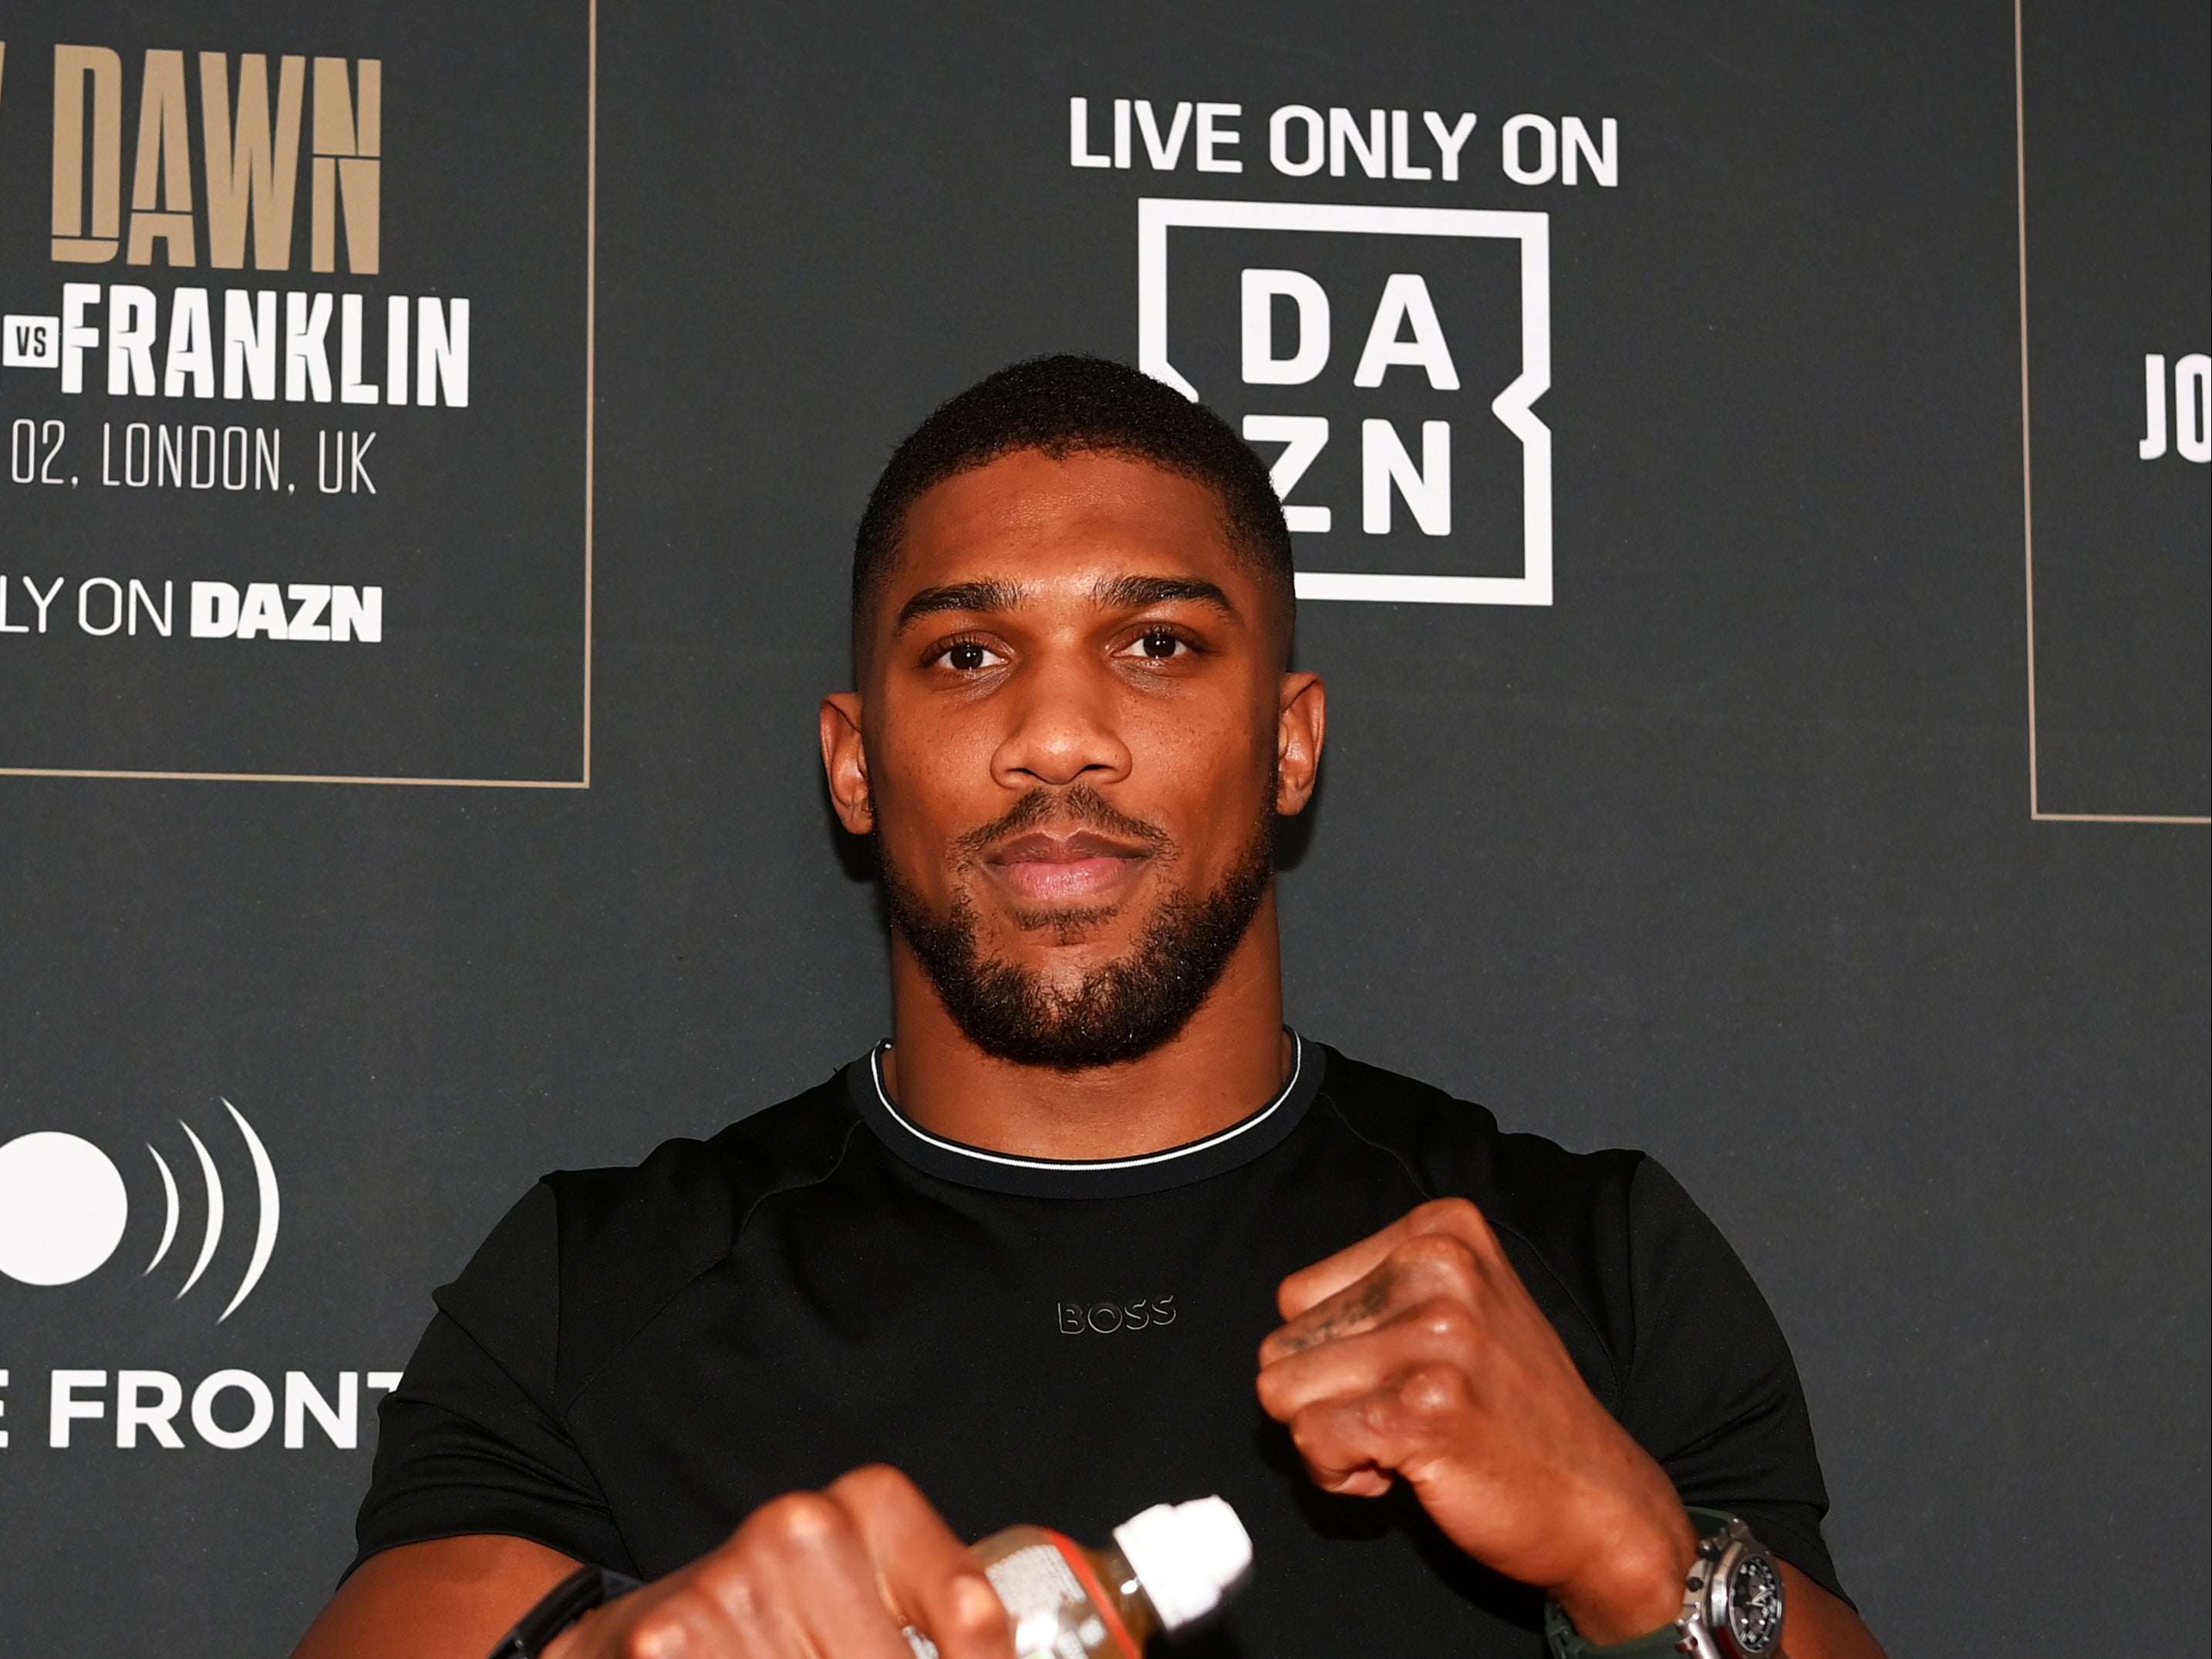 Anthony Joshua and Dazn Boxing face daunting new dawn together The Independent